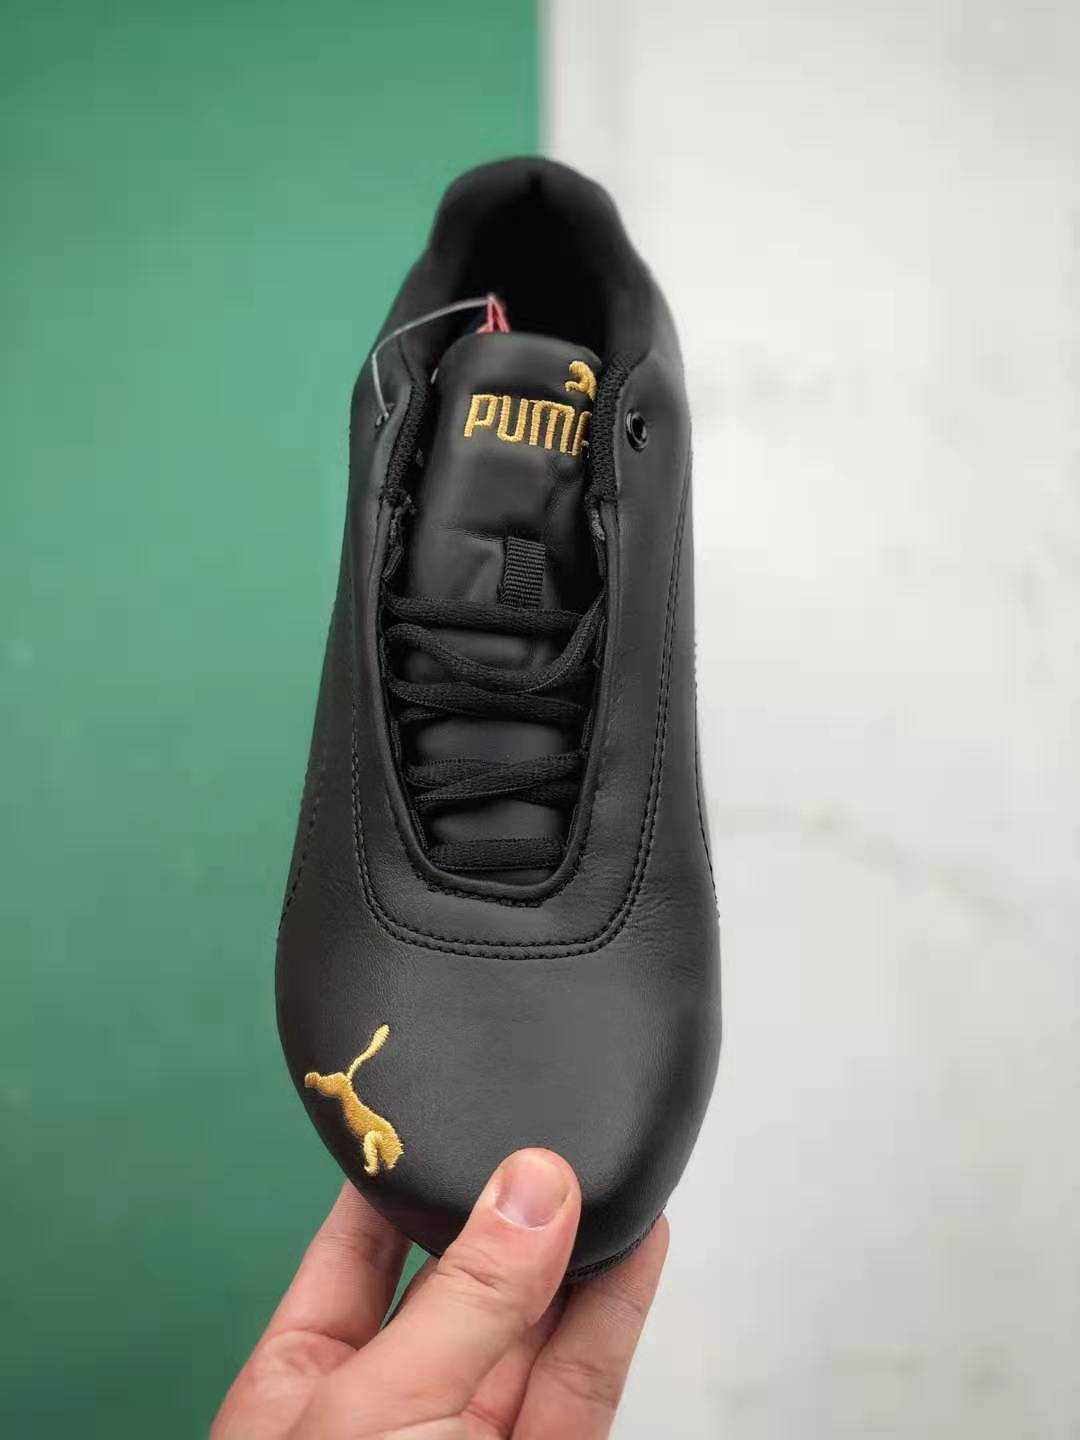 Puma Future Super GT Black Gold Leather Running Casual Shoes 356158-01